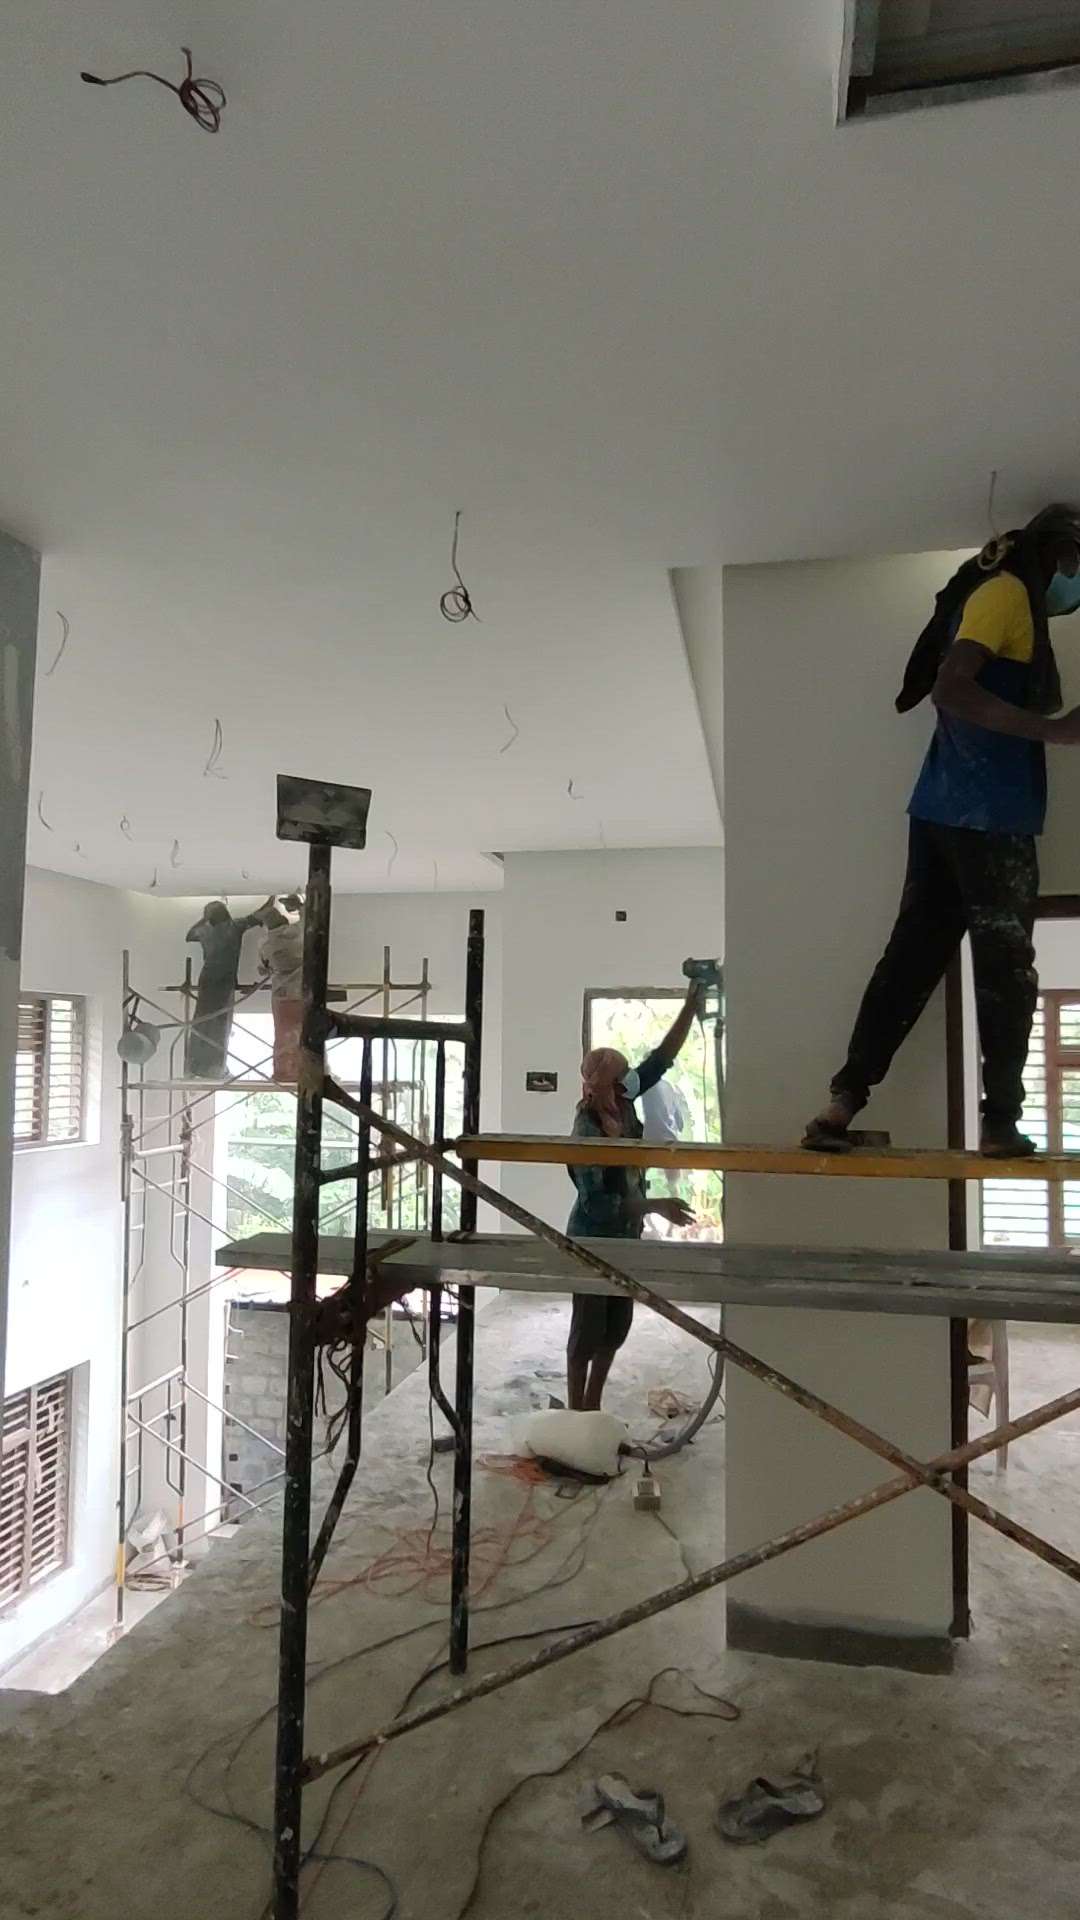 Putty Works 
➡️ Anyone Need #painting #services Please contact +919037712524 or +919633702622 #asianpaints #home #shortvideo #shorts #straightwaypaintingservices #koloapp #Contractor #HouseConstruction #Architect #InteriorDesigner